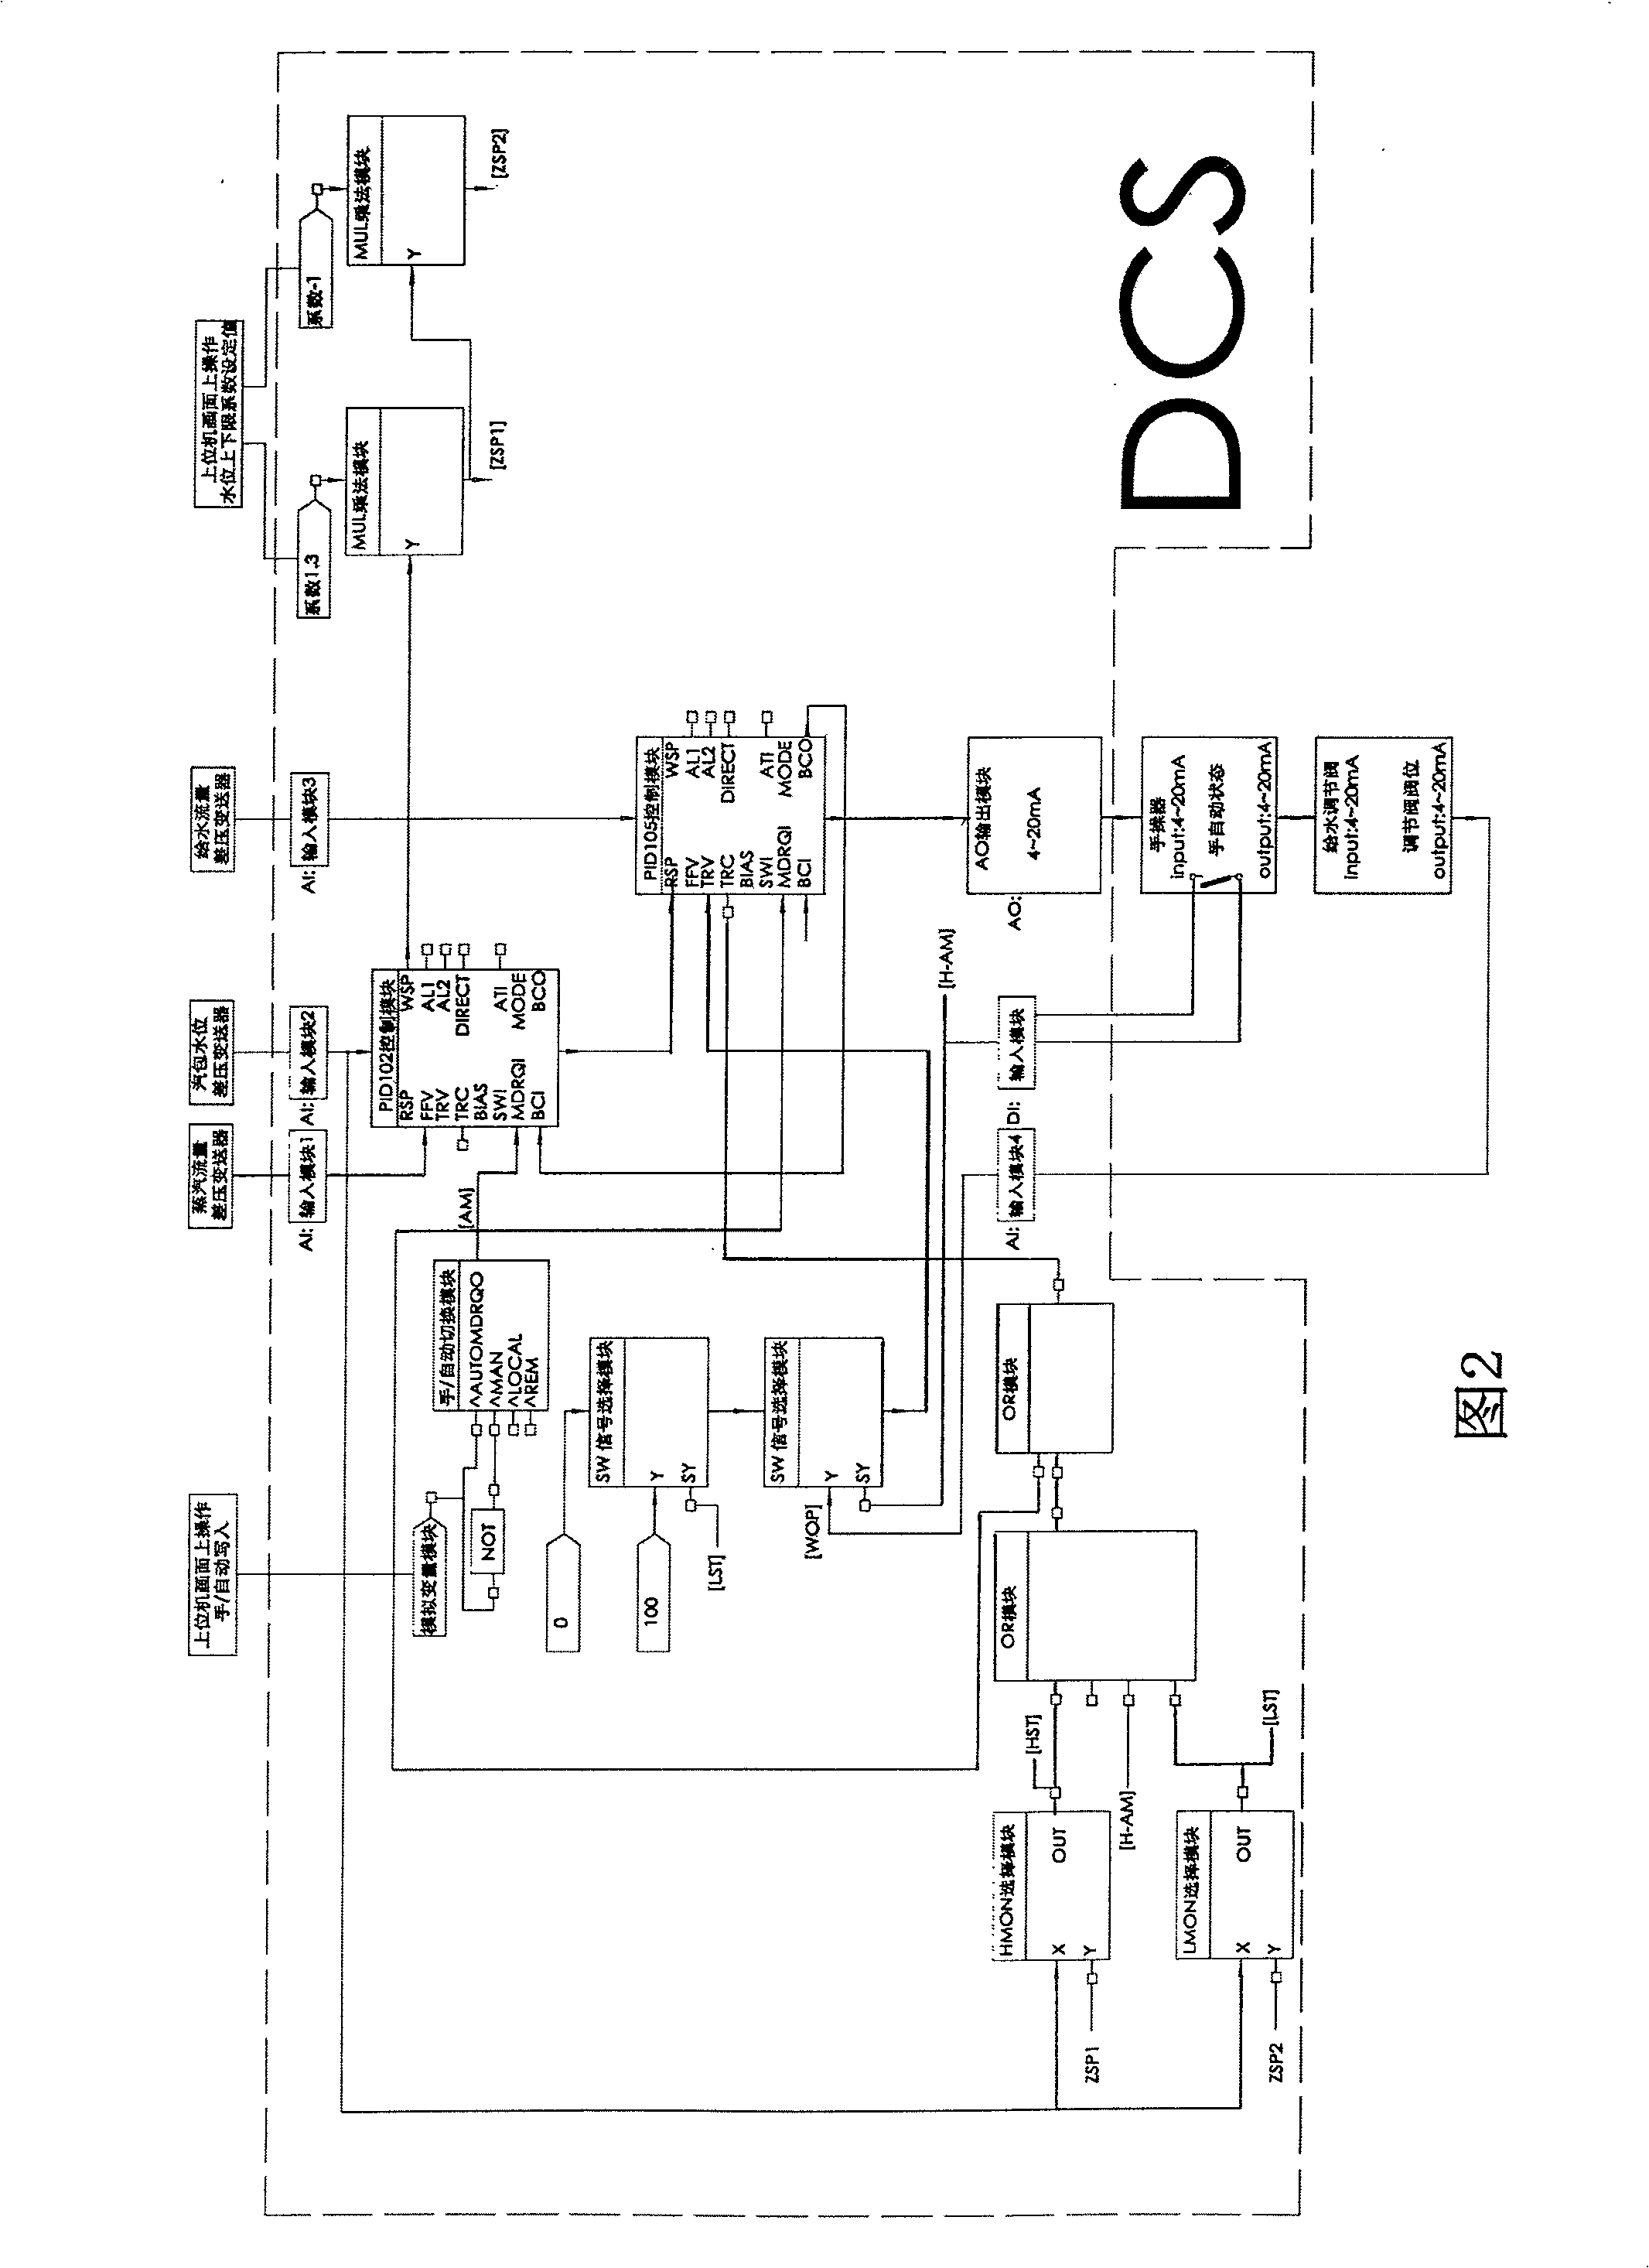 Control method of boiler water level and its control system